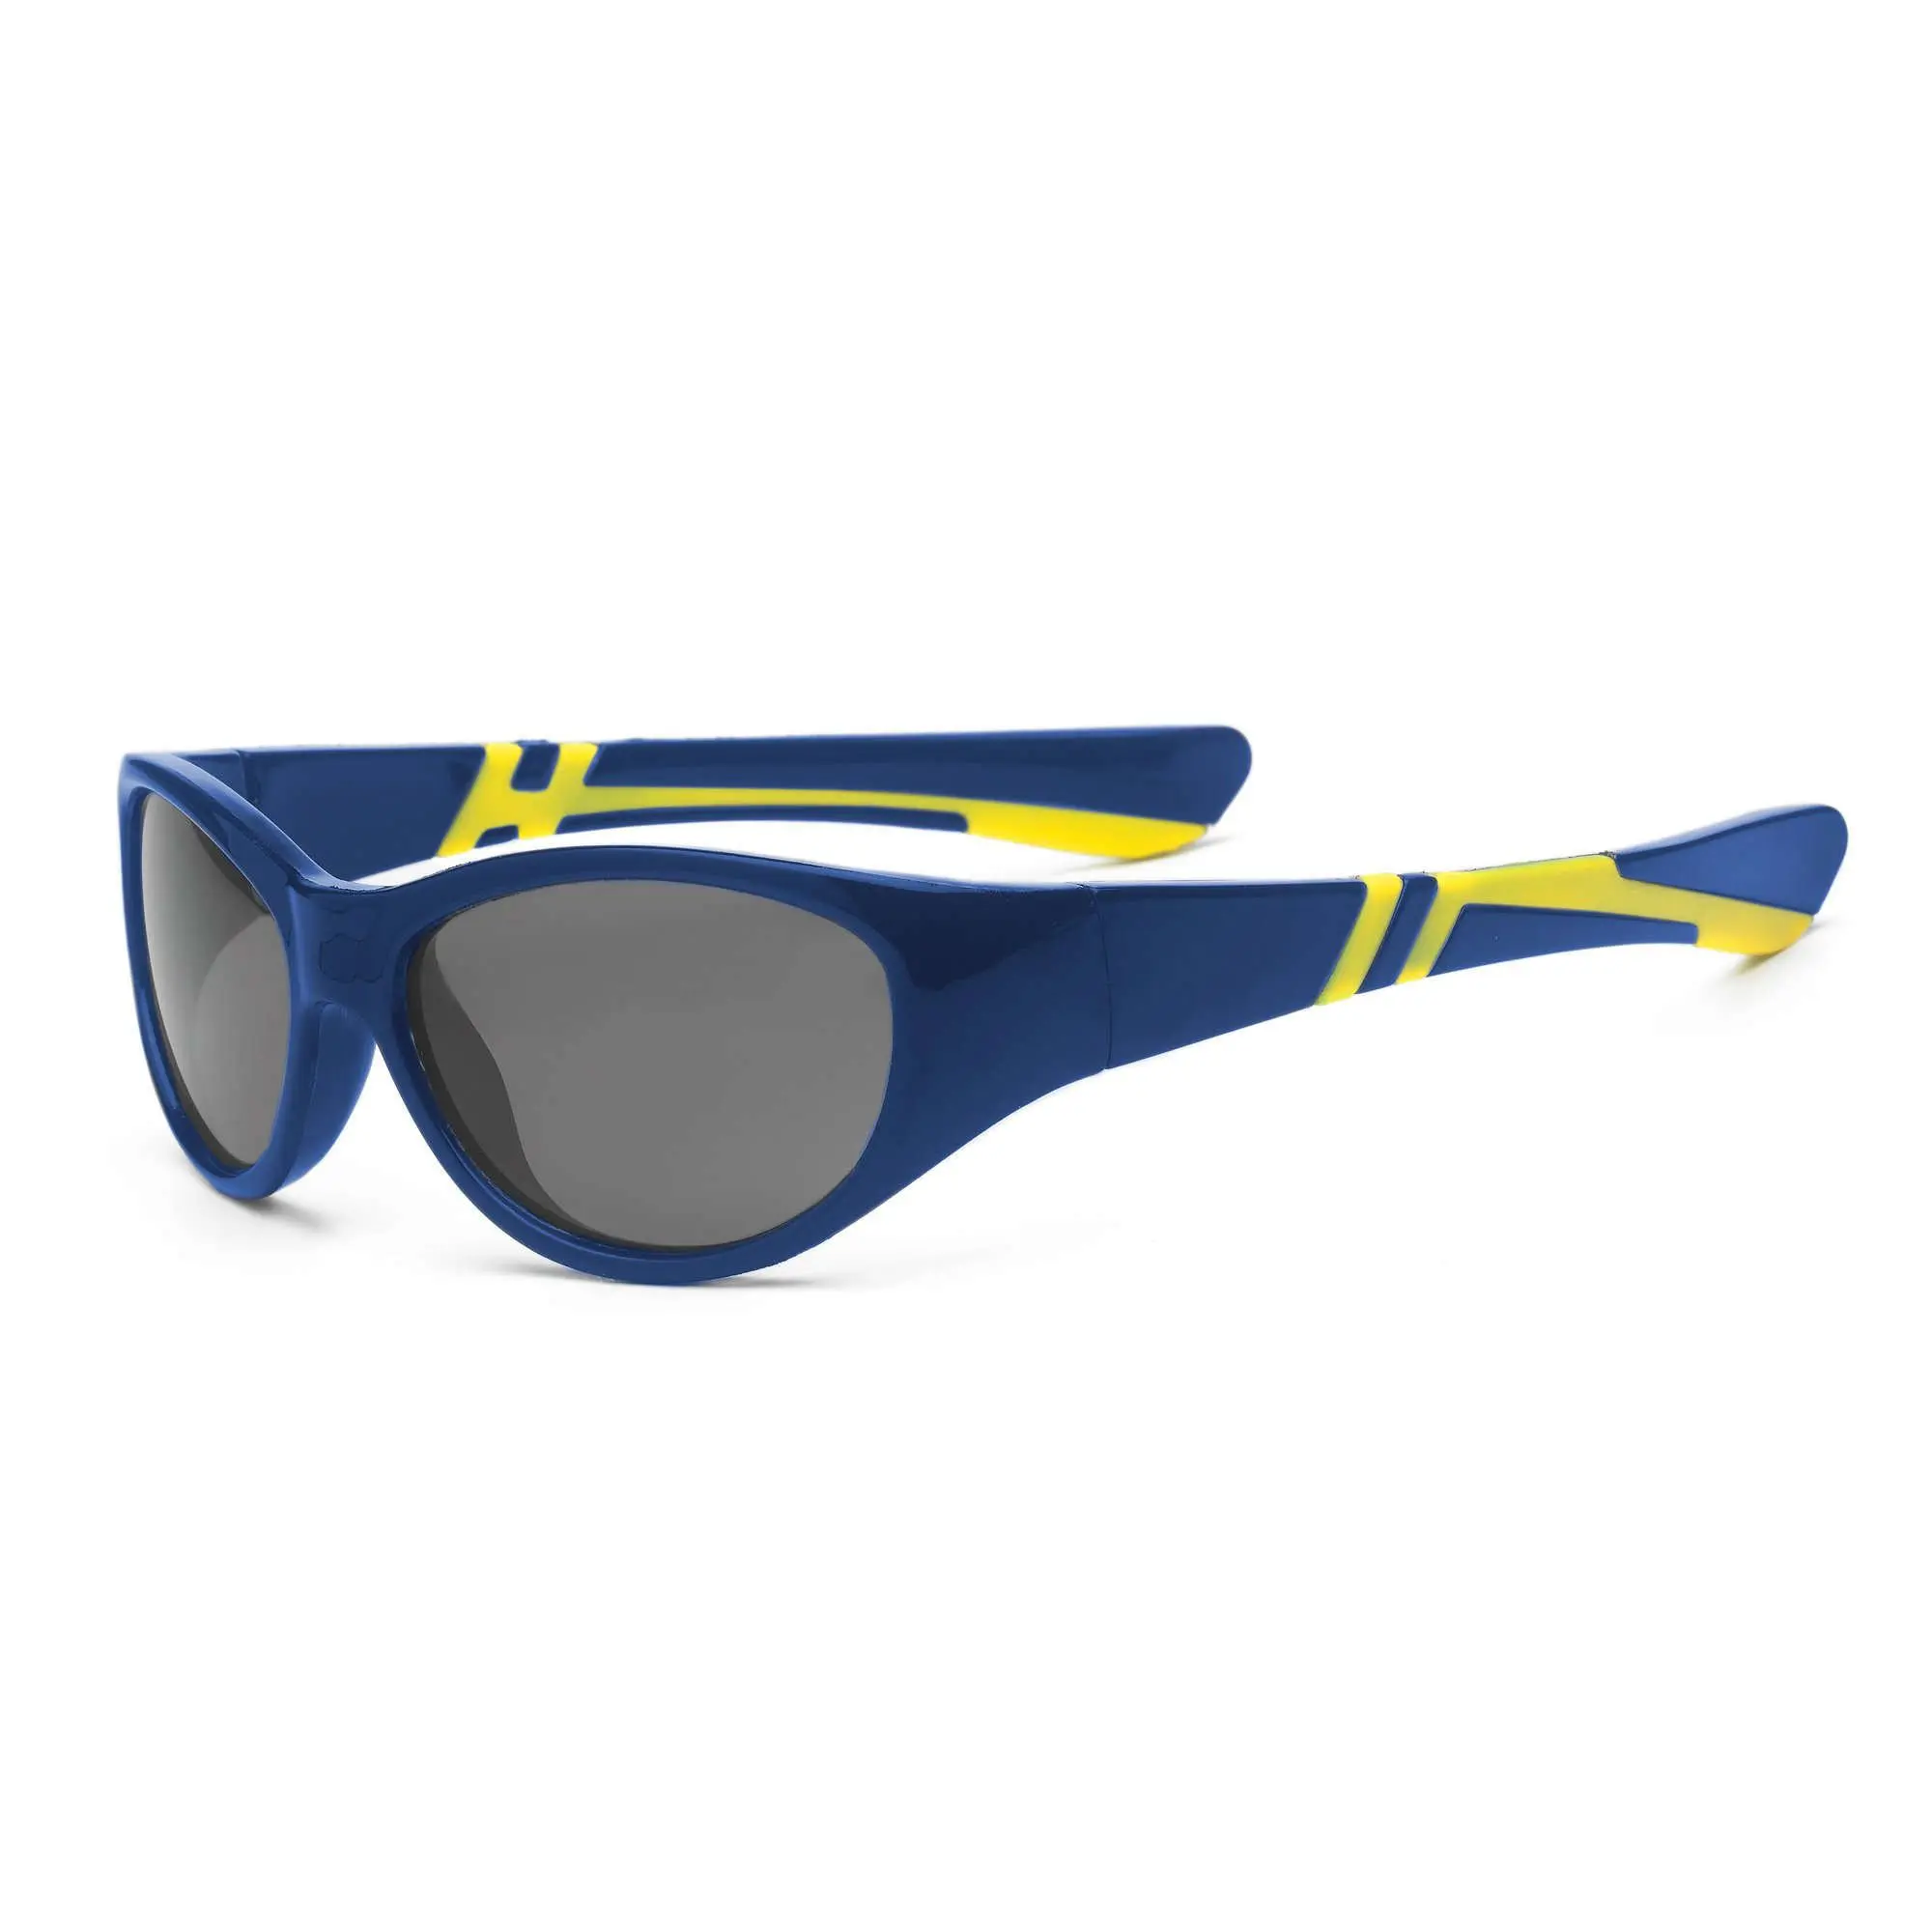 Discover Navy/Yellow Sunglasses